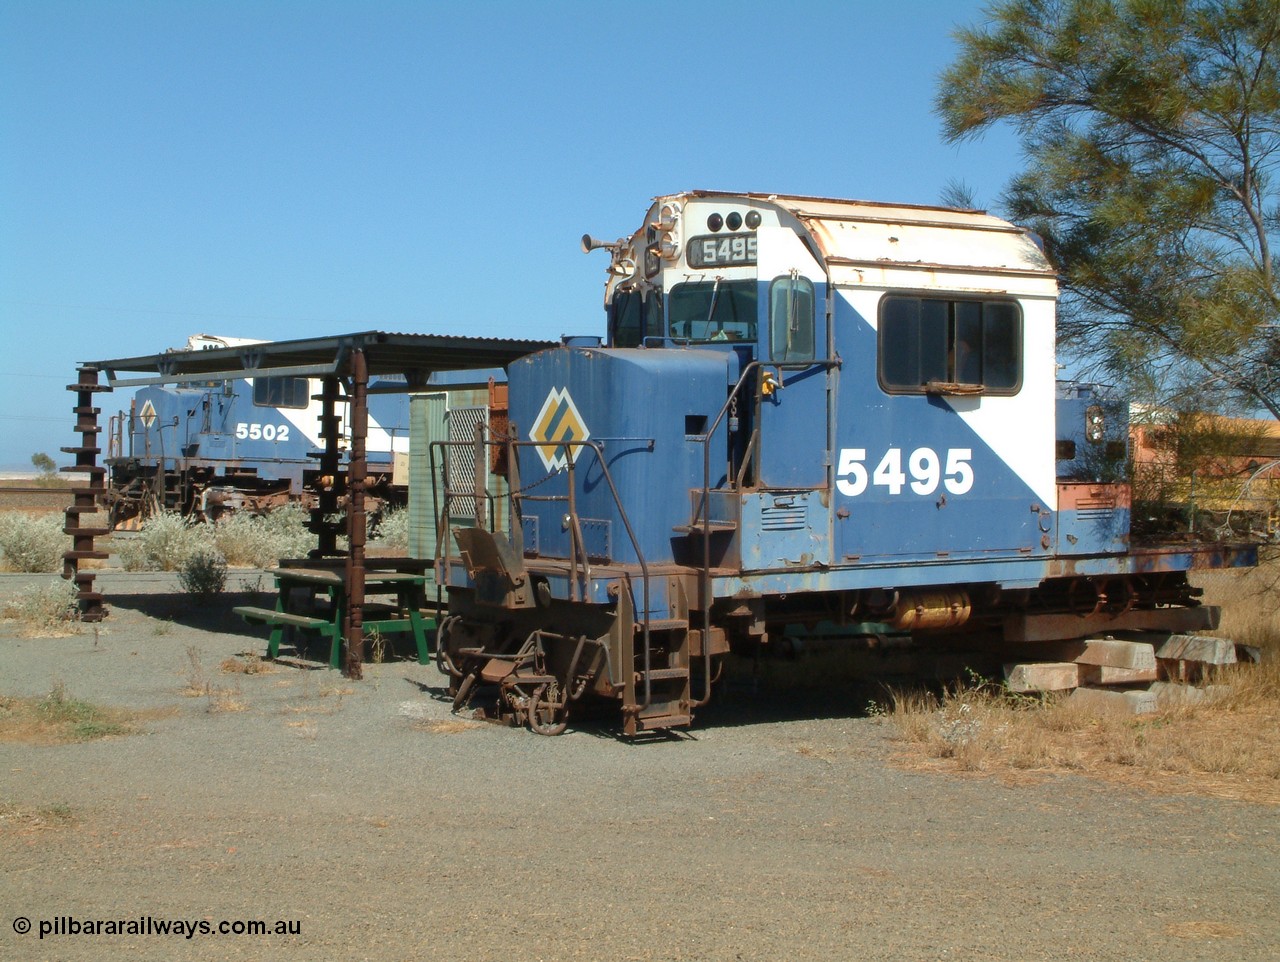 050109 093033
Pilbara Railways Historical Society, the cab from scrapped Australian built MLW M636 model MLW ALCo by Comeng NSW 5495 serial C6084-11 built in Nov-1974. Sister complete unit 5502 can be seen beyond the ALCo crank and cam shafts holding up the veranda. 9th October 2005.
Keywords: 5495;Comeng-NSW;MLW;ALCo;M636;C6084-11;